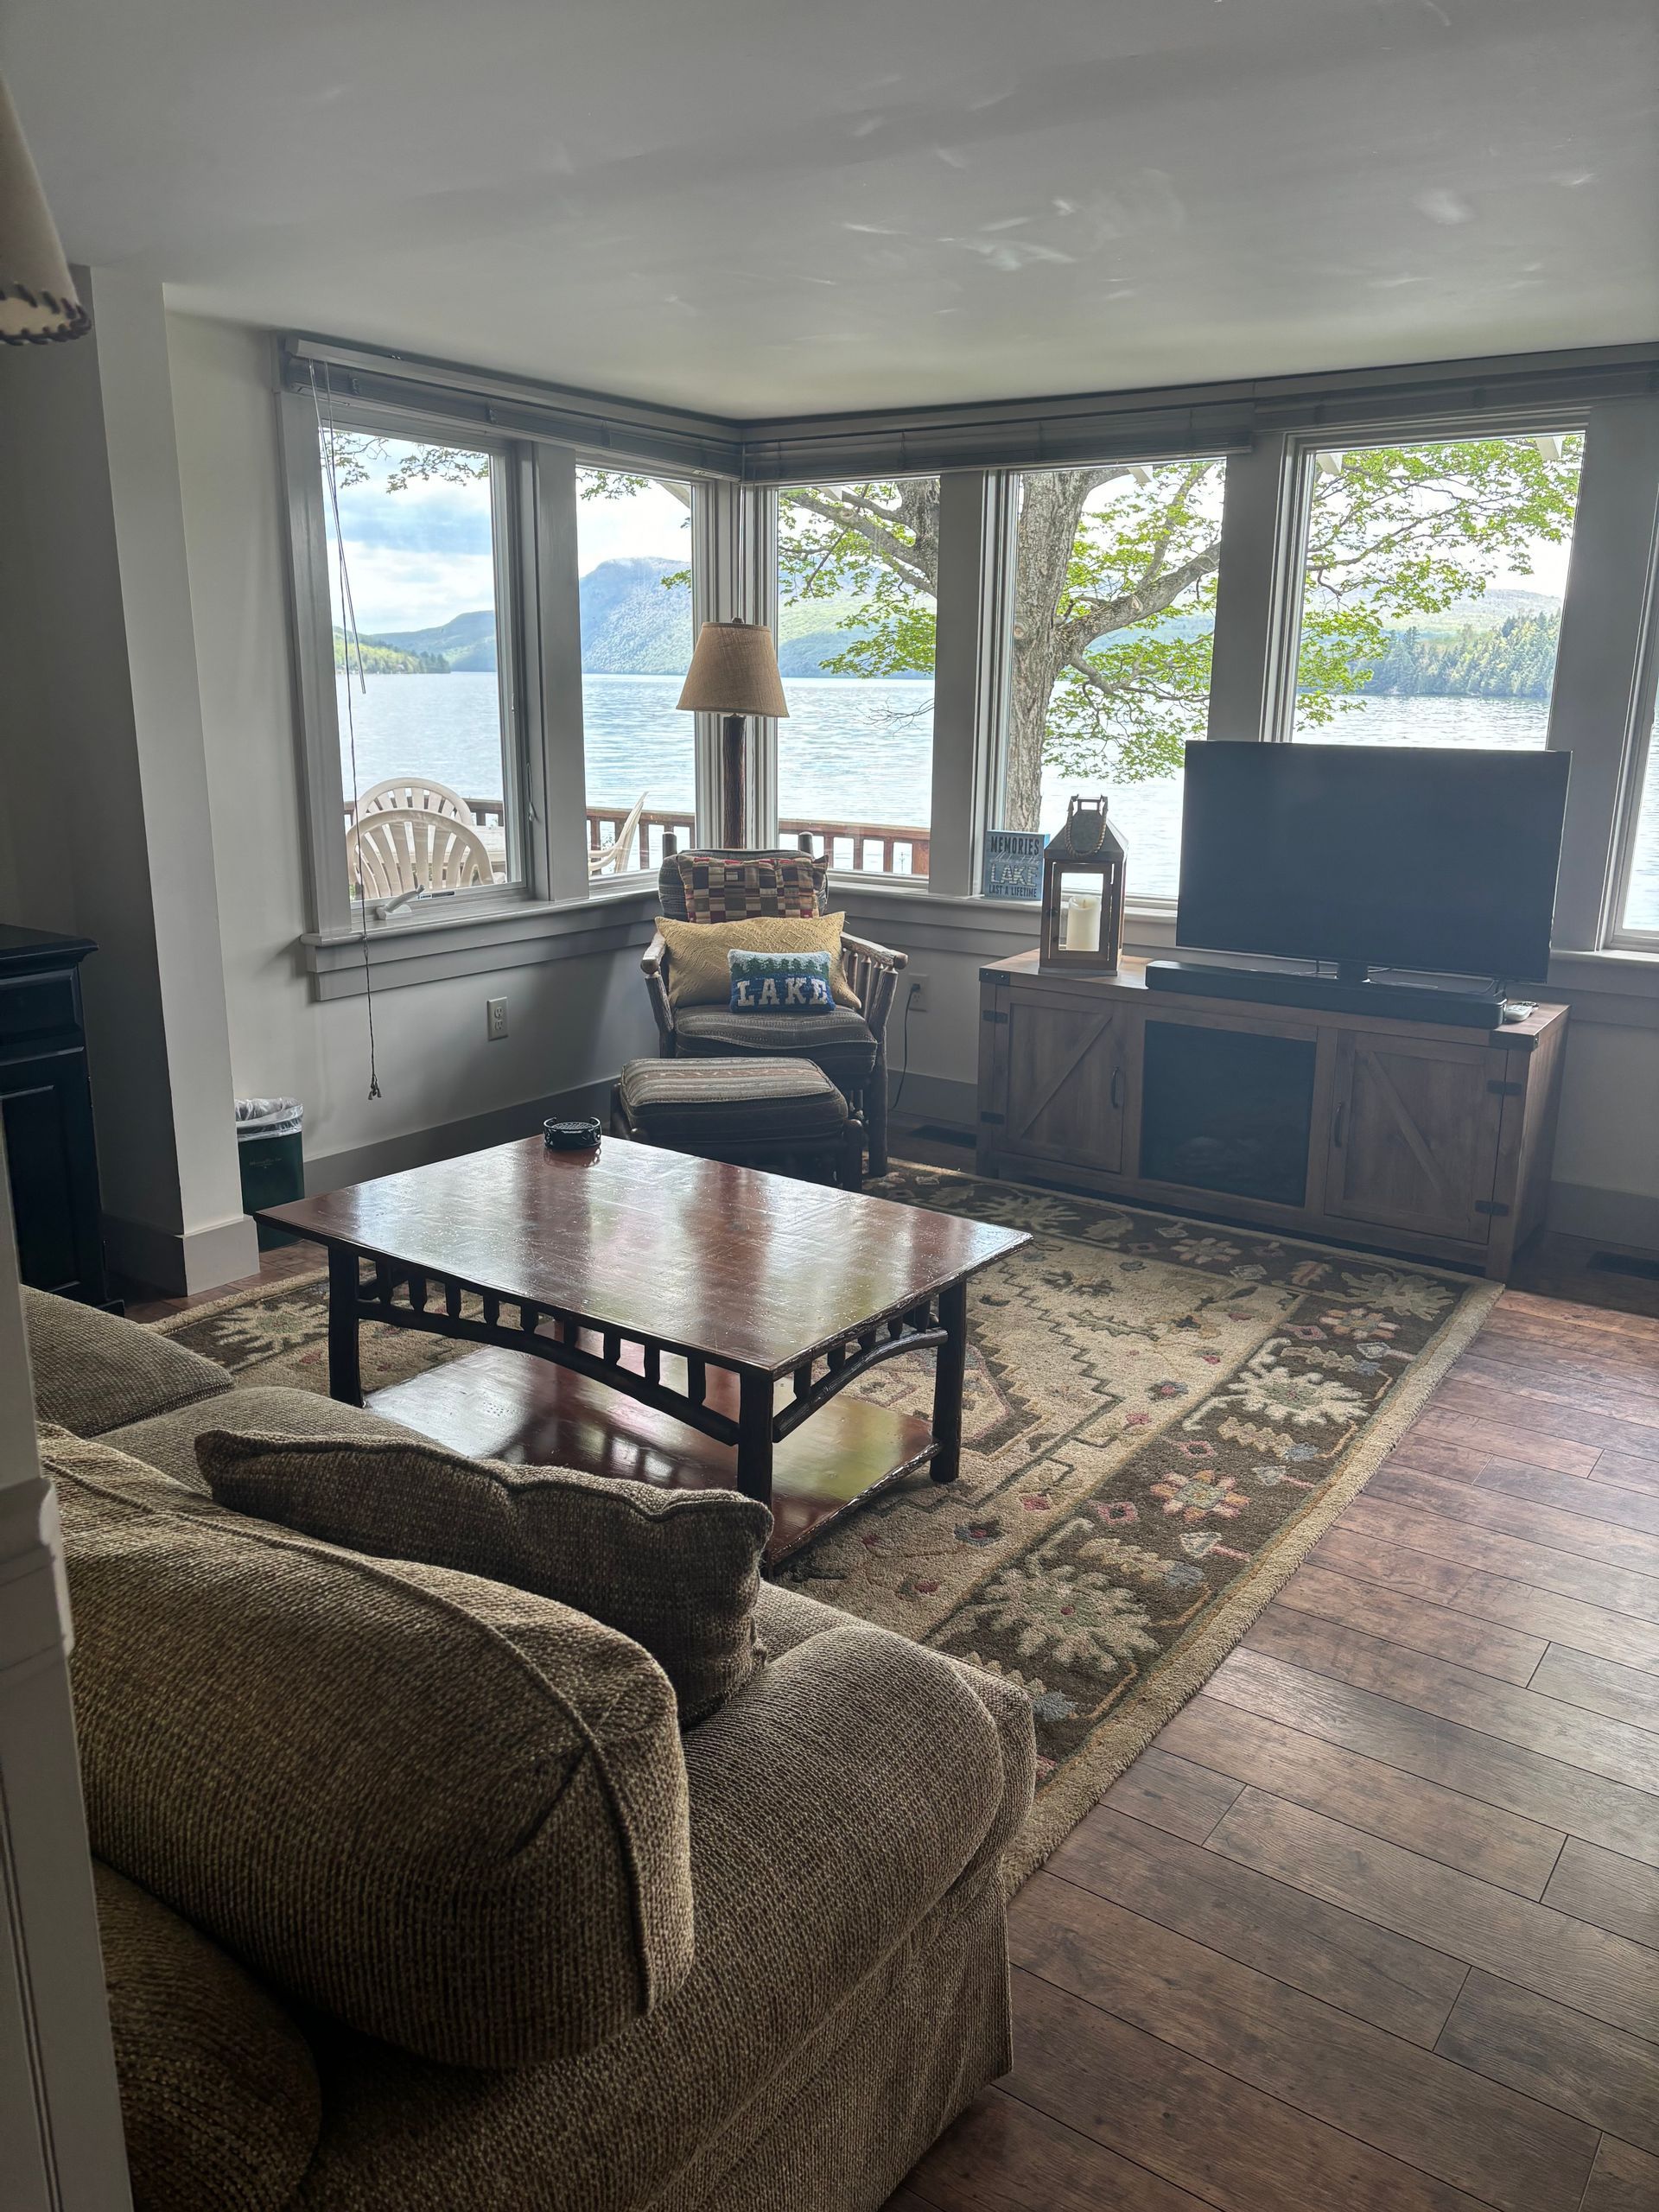 The Birches Lakeside Cottage vacation rental overlooking Lake Willoughby in VT.